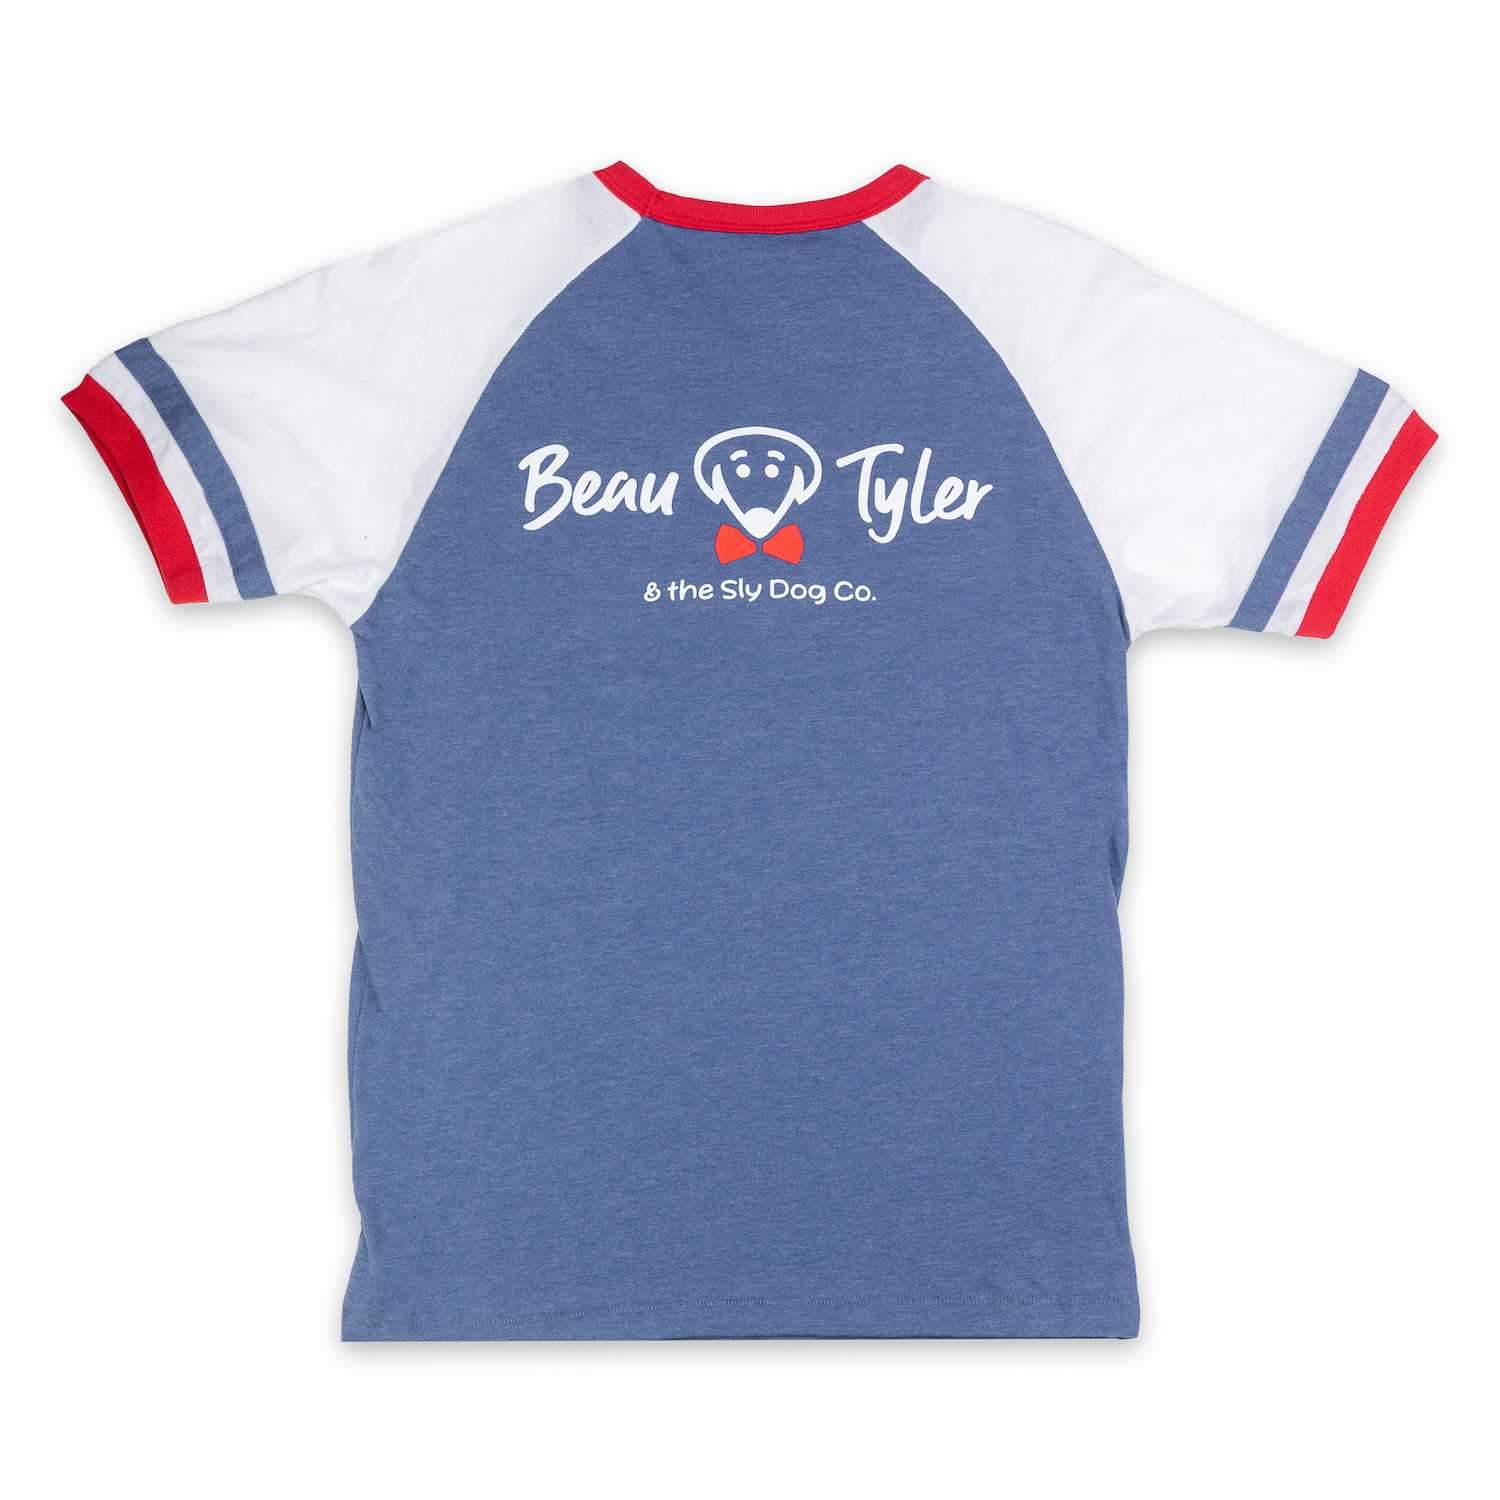 Beau Tyler - Laugh.Love.Lick. T2 blue white red back